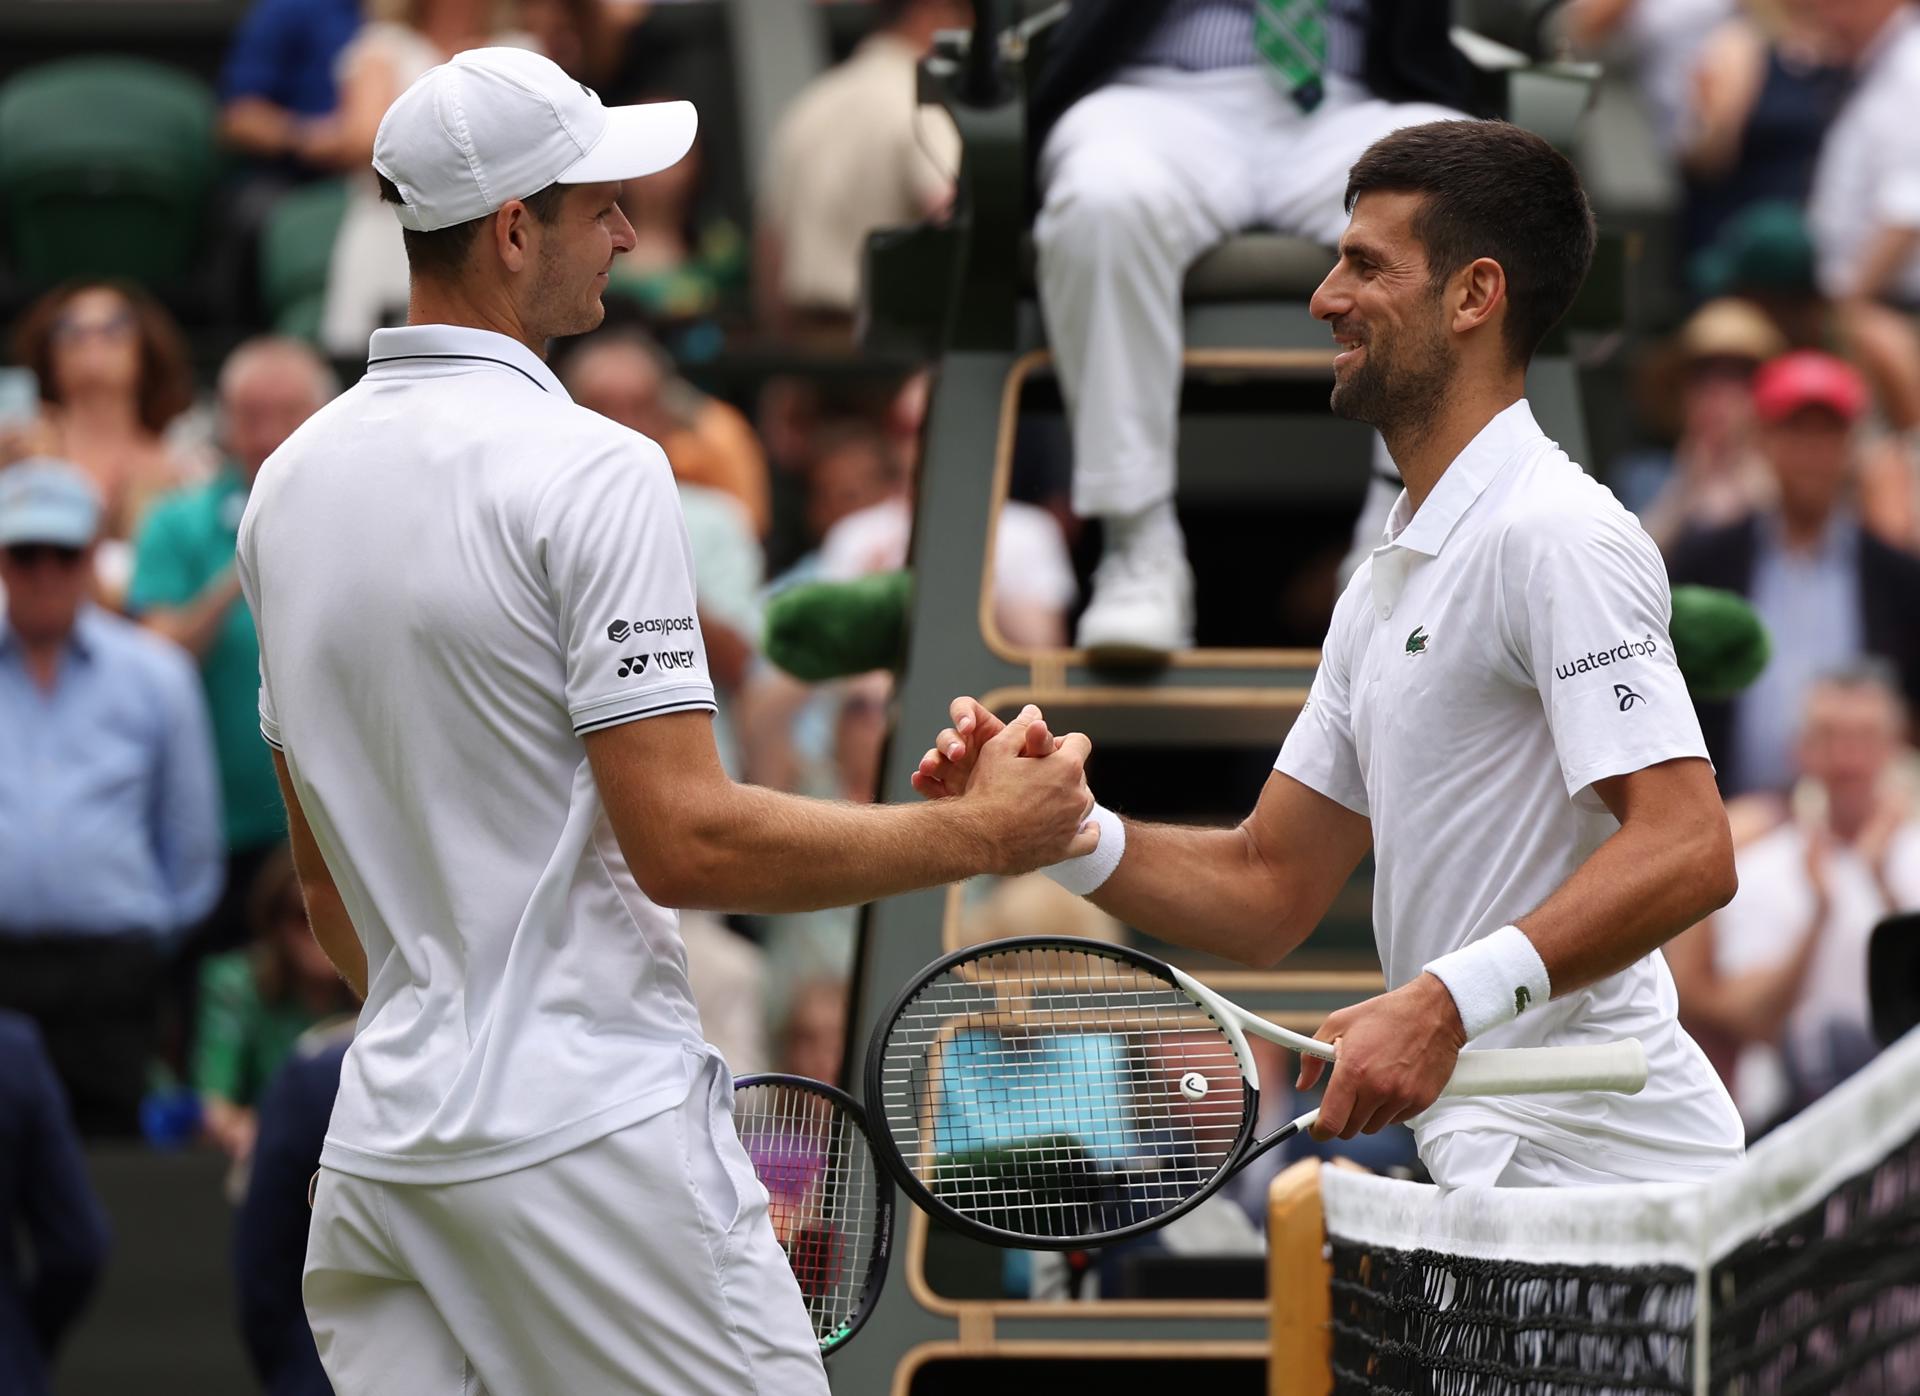 Novak Djokovic (R) of Serbia shakes hands with Hubert Hurcacz of Poland after winning their fourth-round match at Wimbledon on 10 July 2023 in London, United Kingdom. Djokovic won 7-6 (8-6), 7-6 (8-6), 5-7, 6-4. EFE/EPA/NEIL HALL EDITORIAL USE ONLY